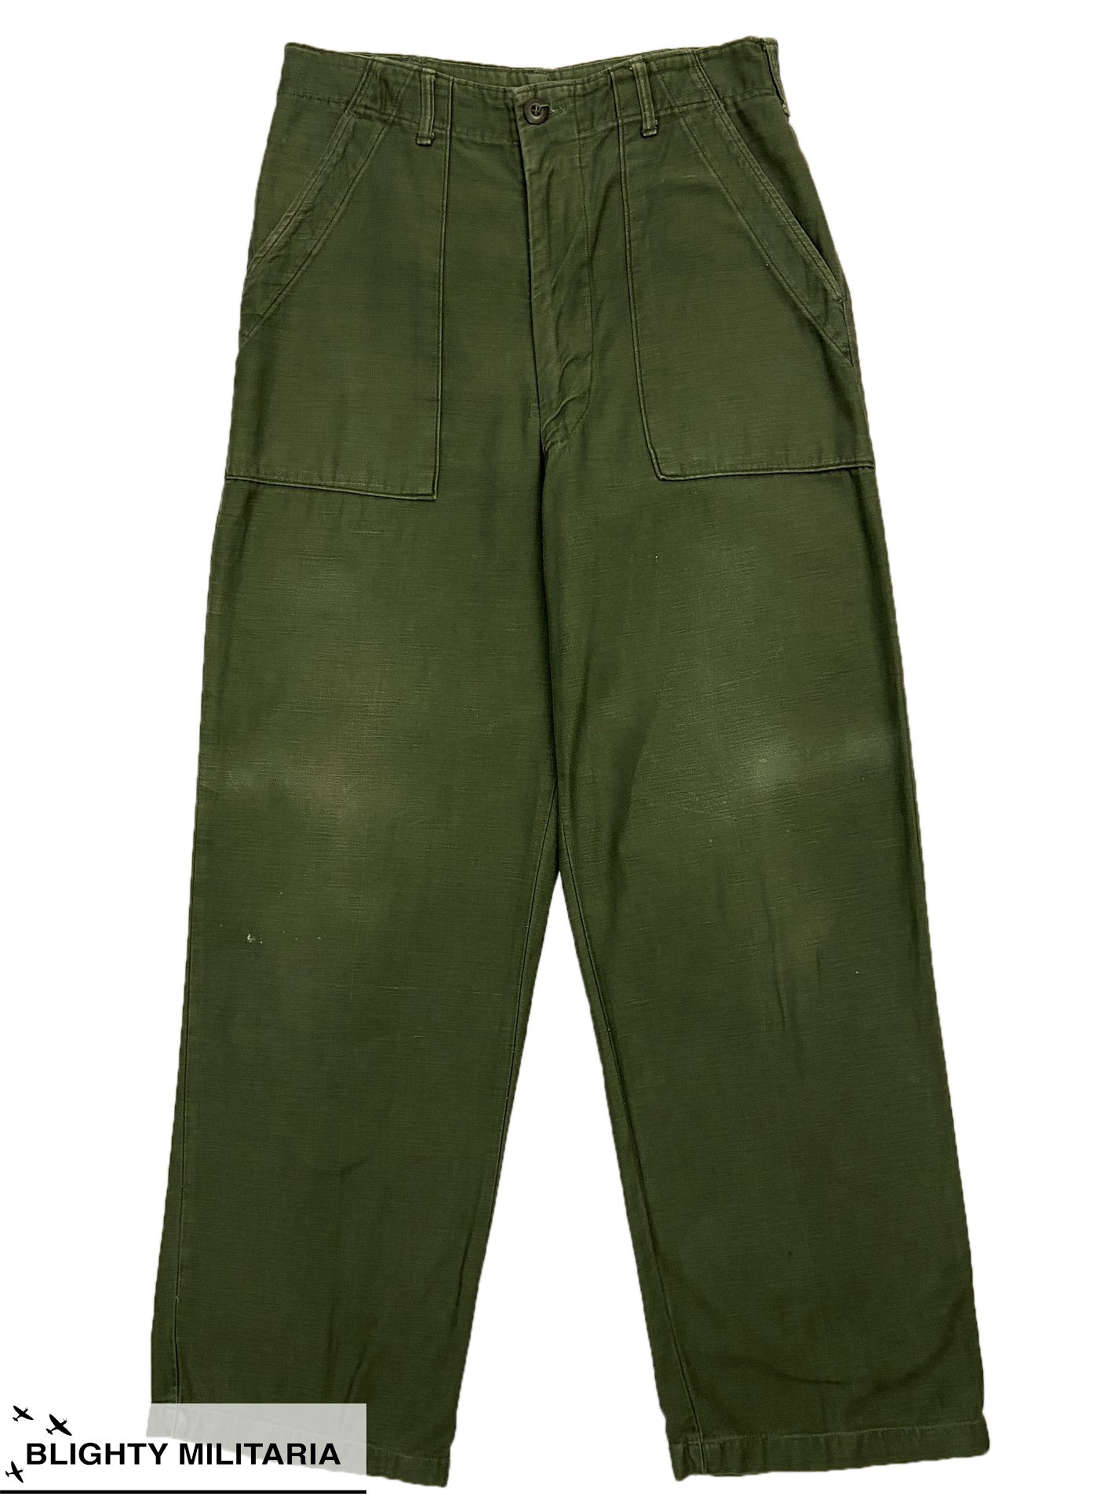 Original 1968 Dated US Army OG 107 Sateen Fatigue Trousers - 32x31